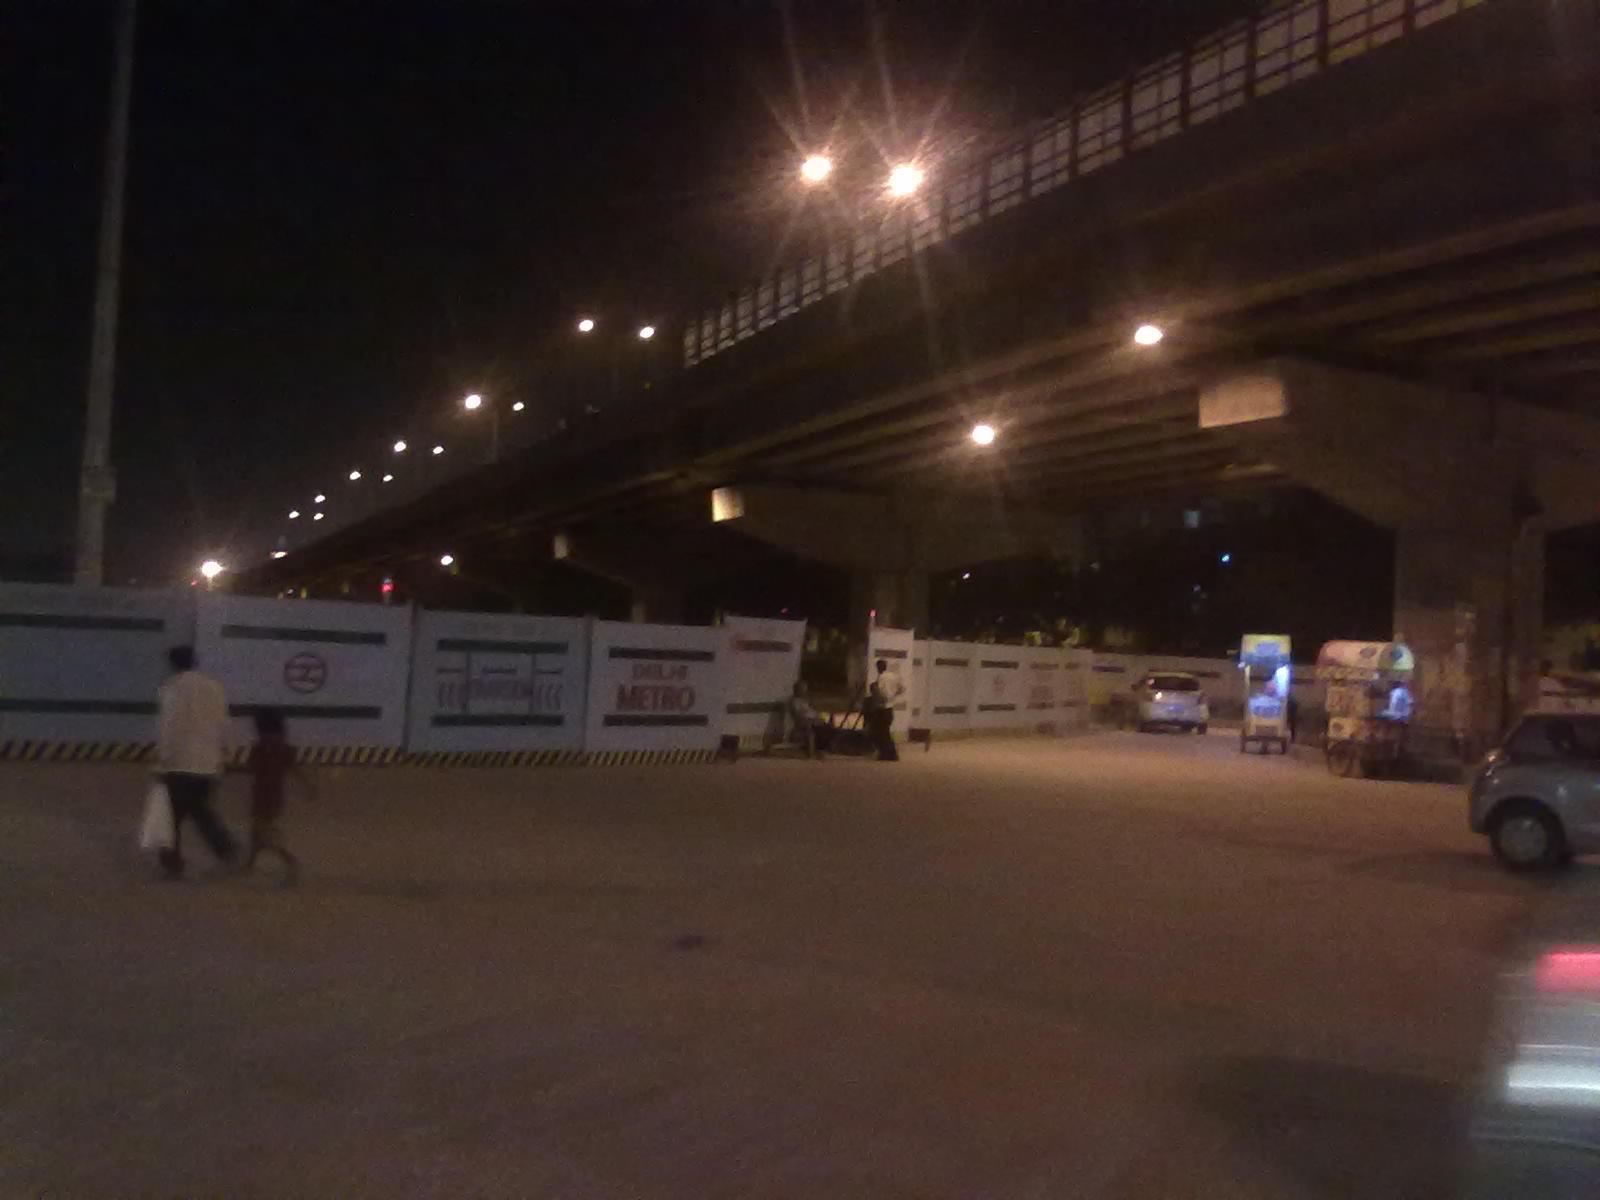 Noida commuter woes: People use poor-lit under-construction road to reach nearby Delhi Metro station